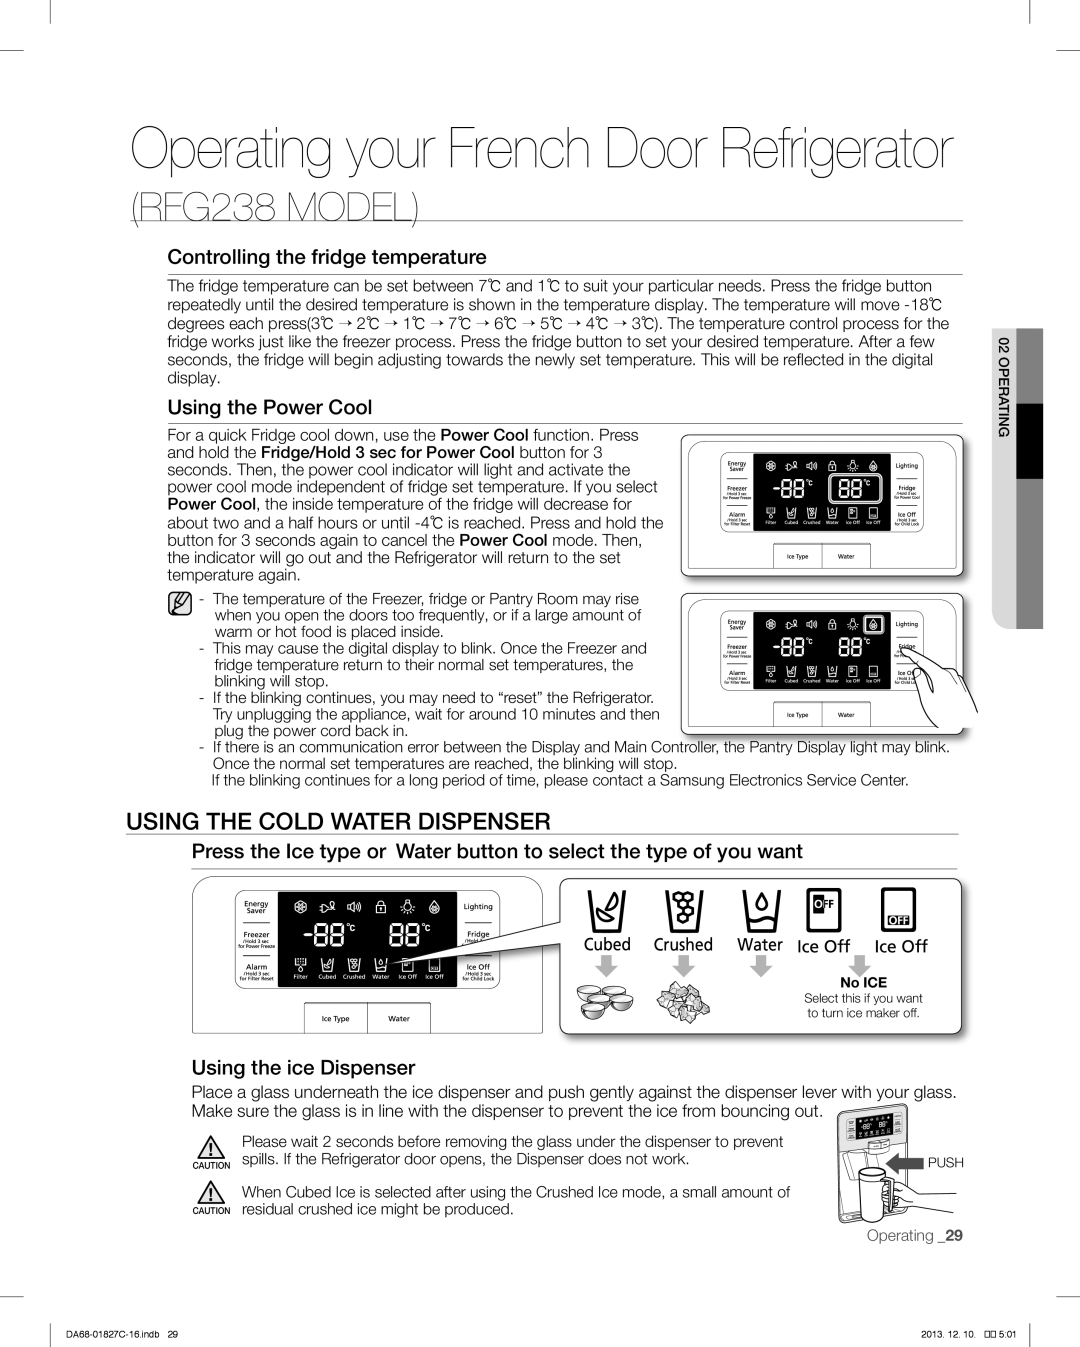 Samsung RFG237AARS user manual Operating your French Door Refrigerator, RFG238 MODEL, Using The Cold Water Dispenser 